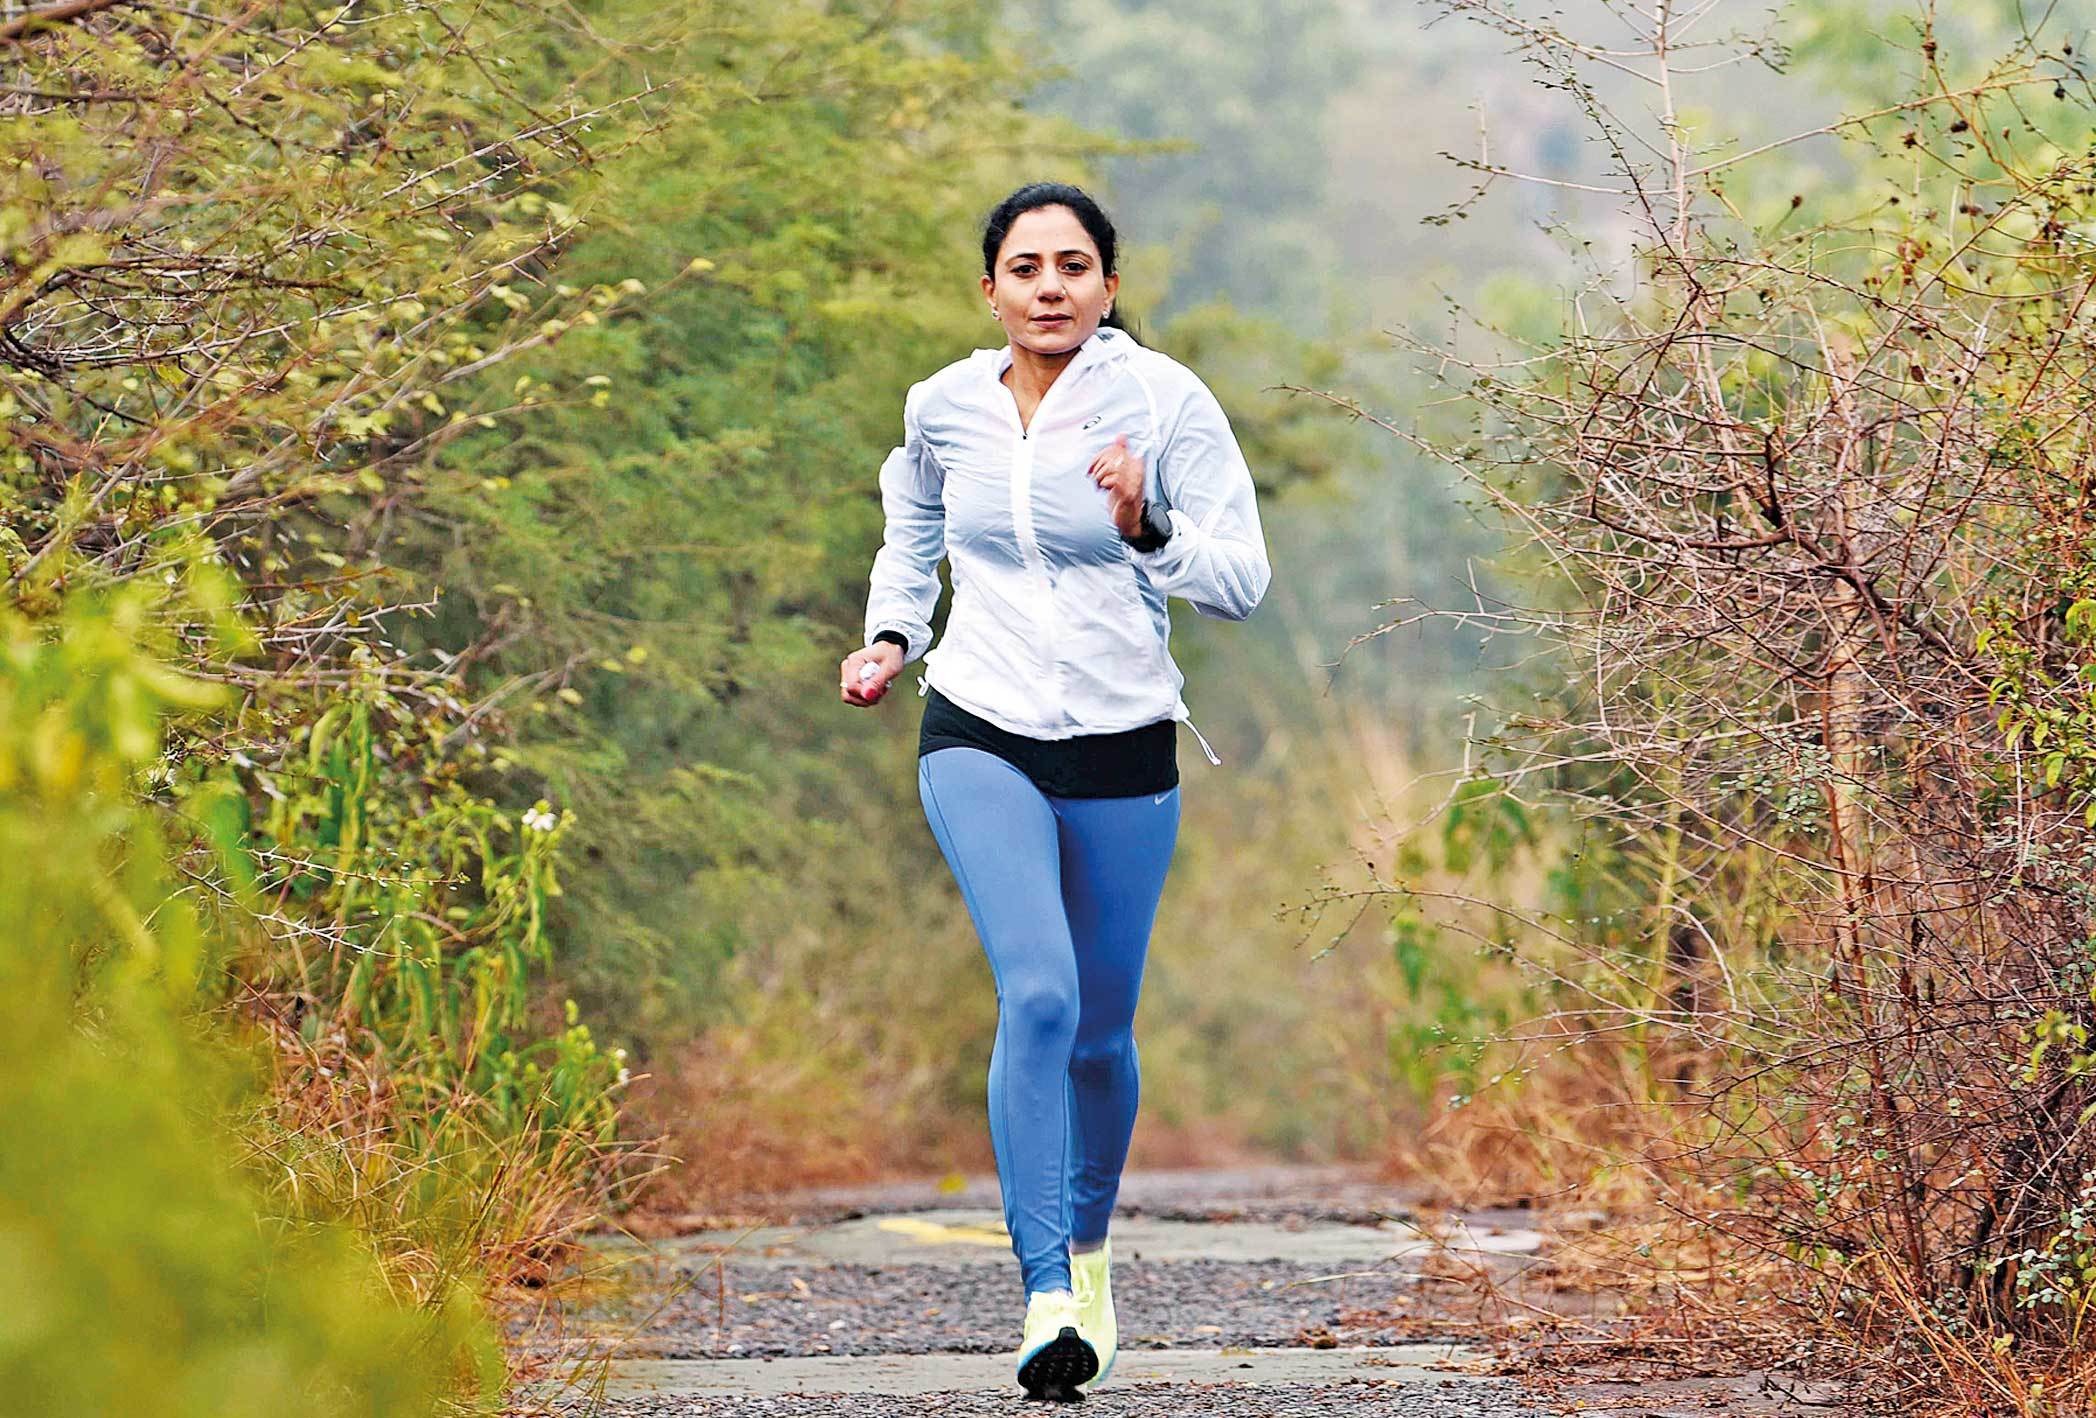 Manisha Srivastava, a resident of Sector 50, Gurgaon, says she is surprised that no woman from a fitness-crazy town like  Gurgaon achieved this feat before her